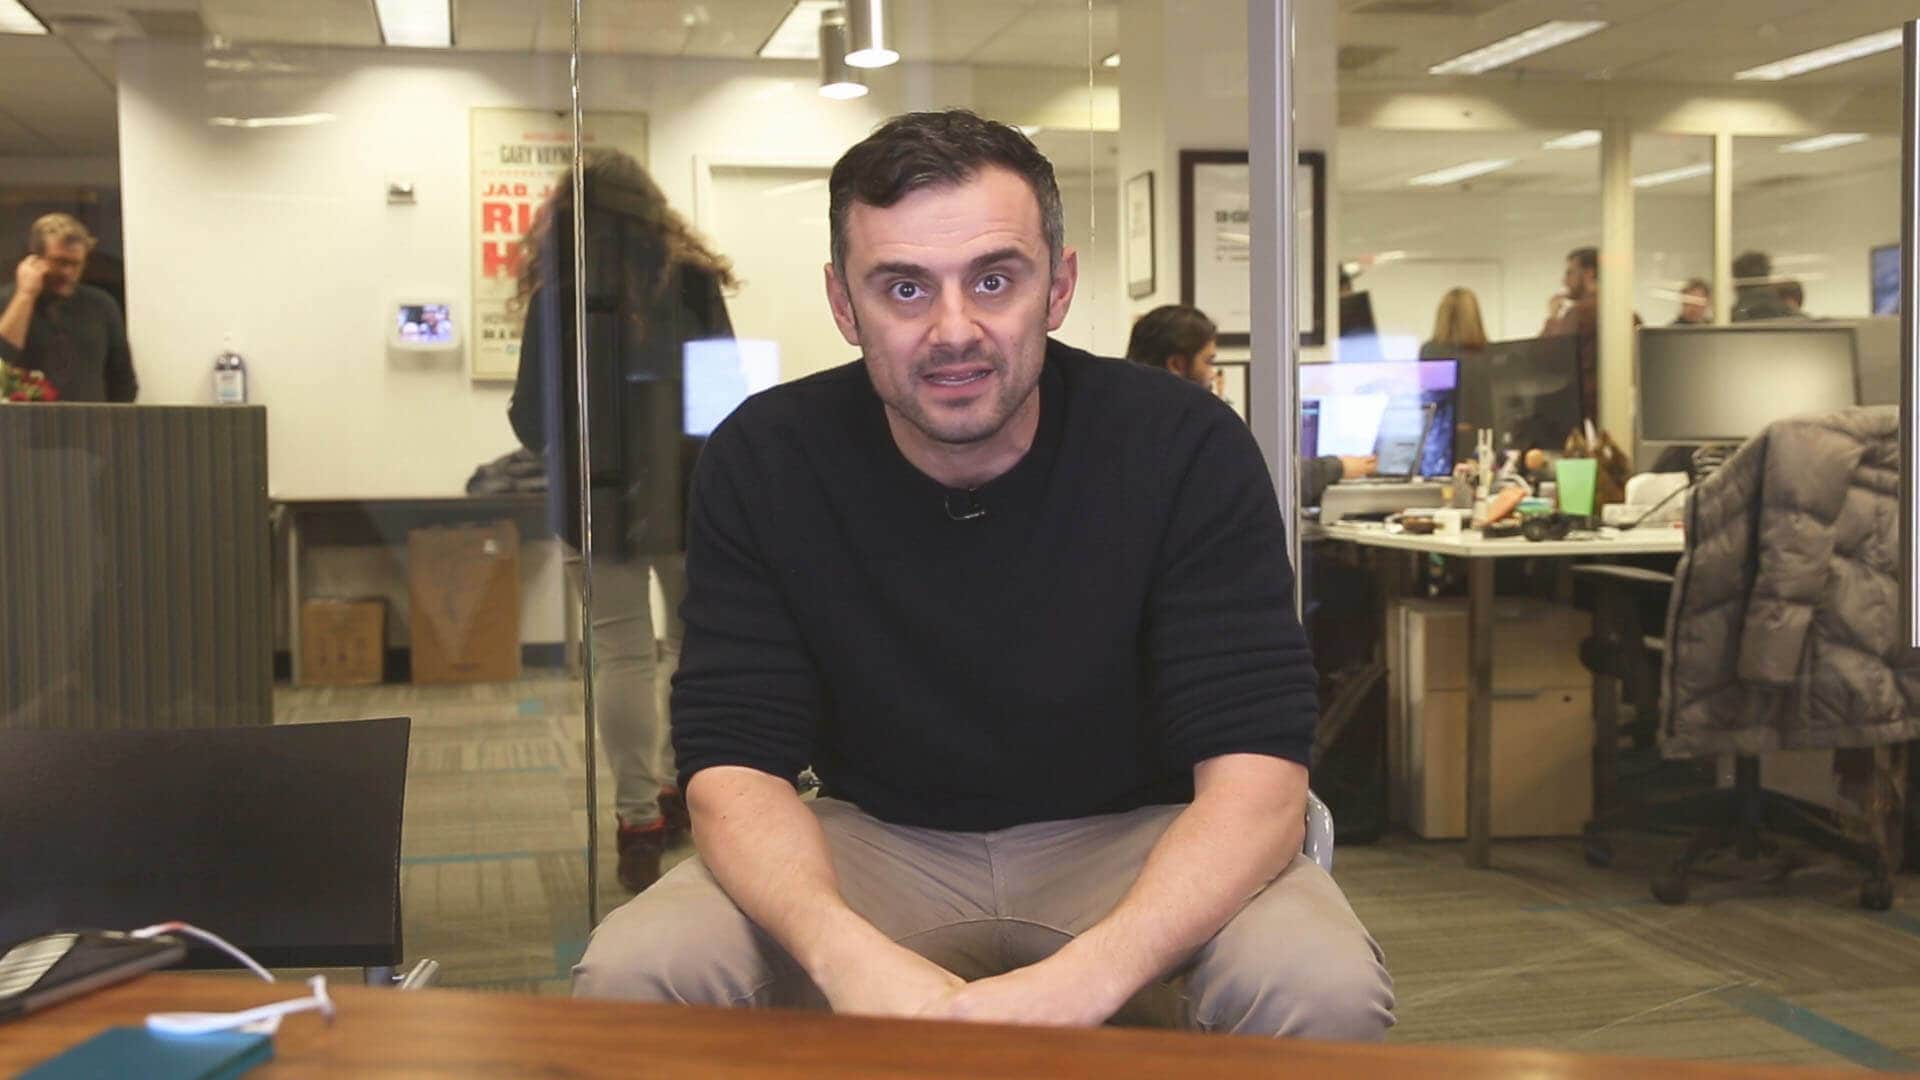 The Future of the Music Industry, Crush It!, and Anchor as Podcasting App: #AskGaryVee Episode 183